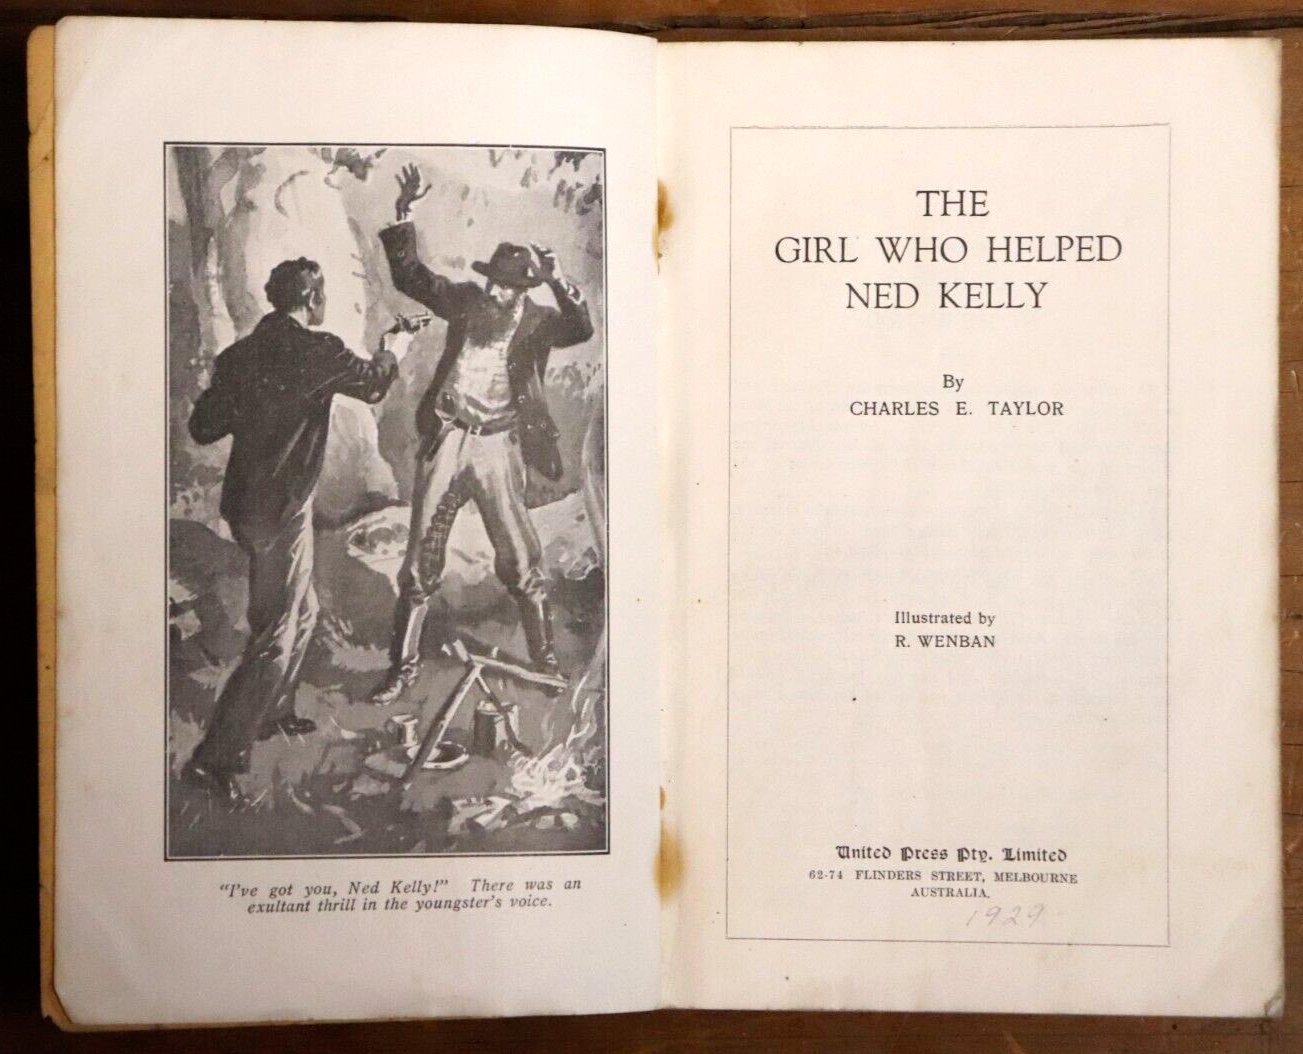 c1929 The Girl Who Helped Ned Kelly by C.E. Taylor Rare Australian Fiction Book - 0